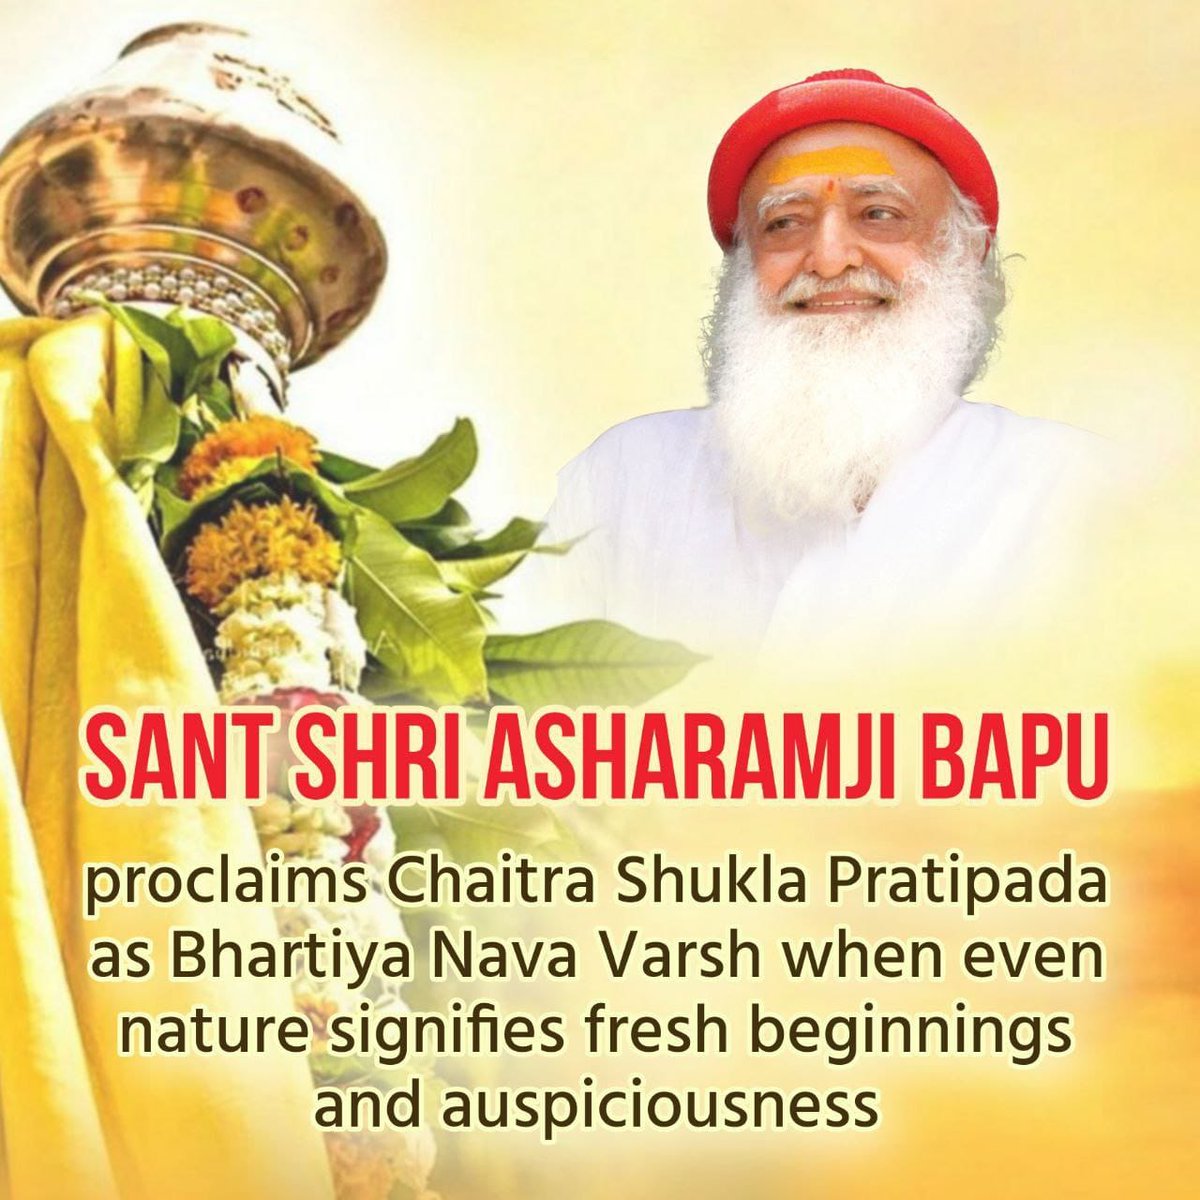 Sant Shri Asharamji Bapu encourages to observe fast during Chaitra Pratipada i.e Navratri. He emphasizes on increasing Japa & dhyan during this period to obtain spiritual benefits. Gudi Padwa is real #हिन्दू_नववर्ष & every one should welcome & celebrate it with enthusiasm.